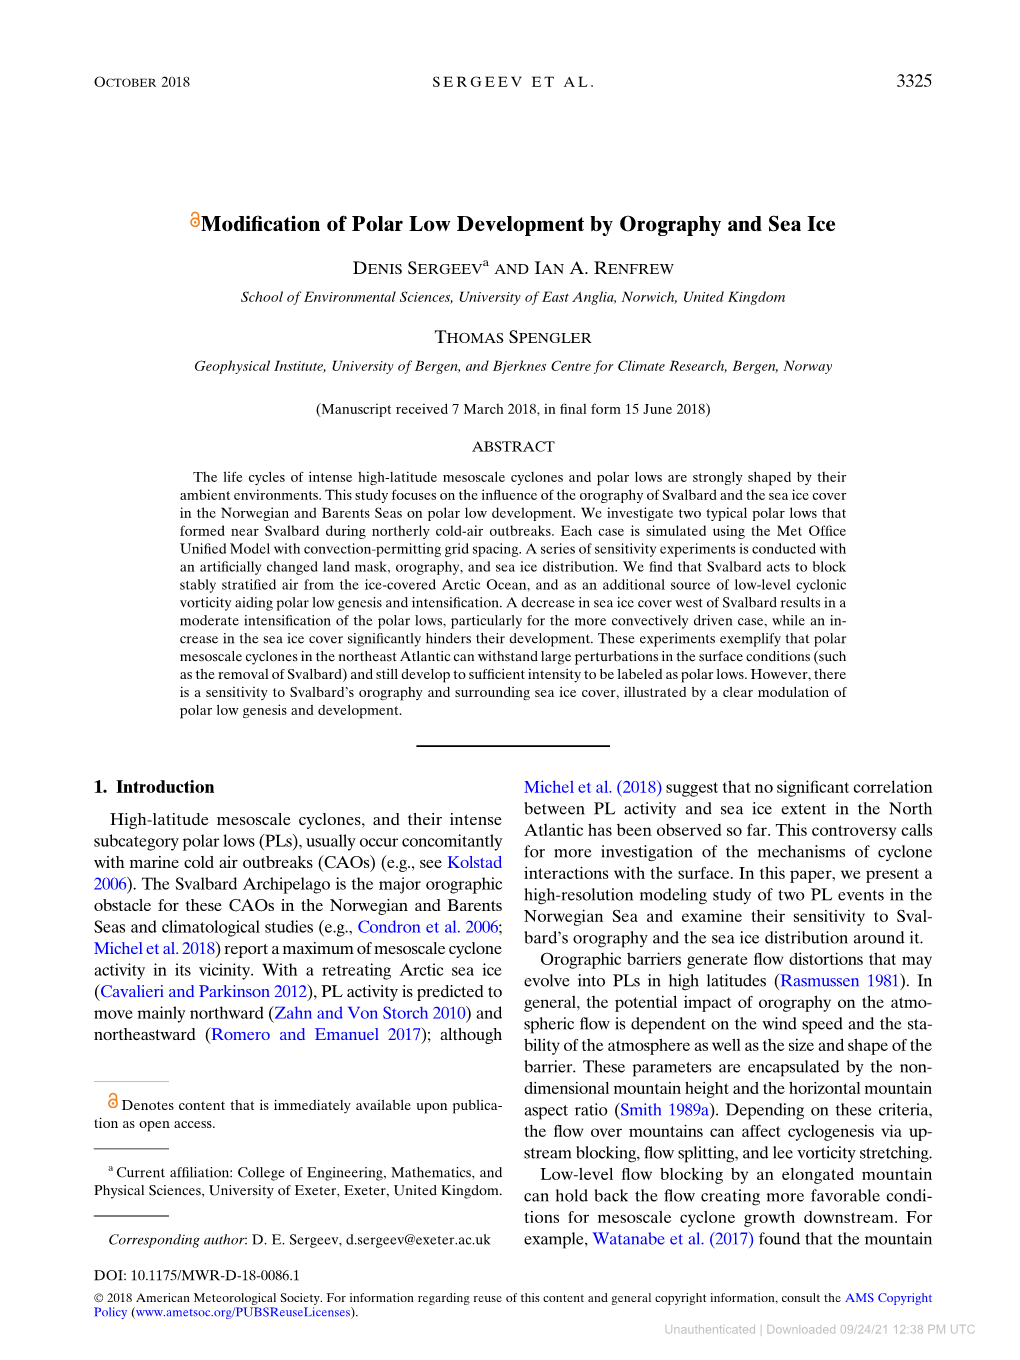 Modification of Polar Low Development by Orography And